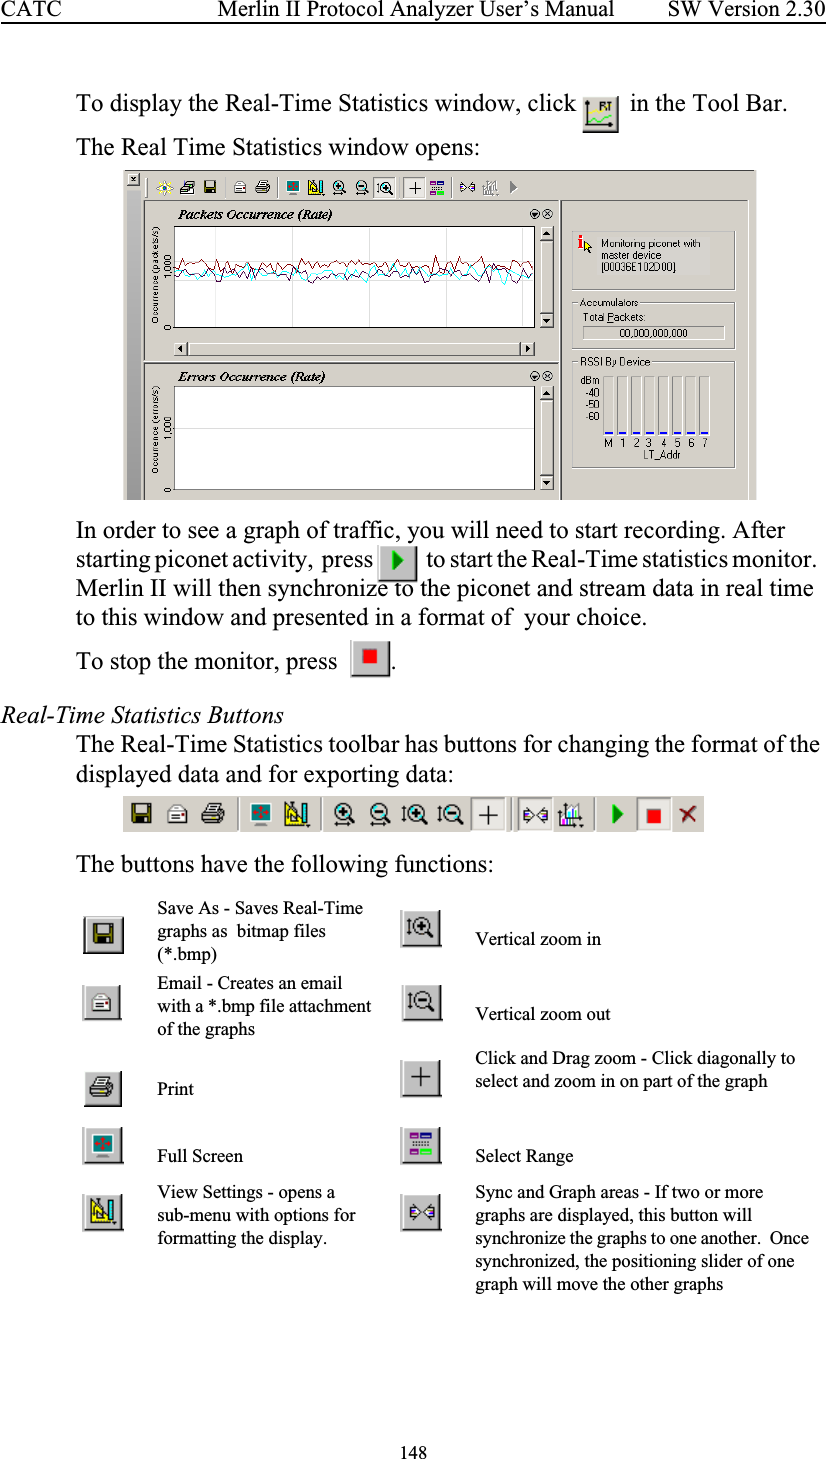 148 Merlin II Protocol Analyzer User’s ManualCATC SW Version 2.30To display the Real-Time Statistics window, click   in the Tool Bar.The Real Time Statistics window opens:In order to see a graph of traffic, you will need to start recording. After starting piconet activity,  press    to start the Real-Time statistics monitor.  Merlin II will then synchronize to the piconet and stream data in real time to this window and presented in a format of  your choice.  To stop the monitor, press   .  Real-Time Statistics ButtonsThe Real-Time Statistics toolbar has buttons for changing the format of the displayed data and for exporting data:The buttons have the following functions:Save As - Saves Real-Time graphs as  bitmap files (*.bmp) Vertical zoom inEmail - Creates an email with a *.bmp file attachment of the graphs Vertical zoom outPrintClick and Drag zoom - Click diagonally to select and zoom in on part of the graphFull Screen Select RangeView Settings - opens a sub-menu with options for formatting the display.  Sync and Graph areas - If two or more graphs are displayed, this button will synchronize the graphs to one another.  Once synchronized, the positioning slider of one graph will move the other graphs